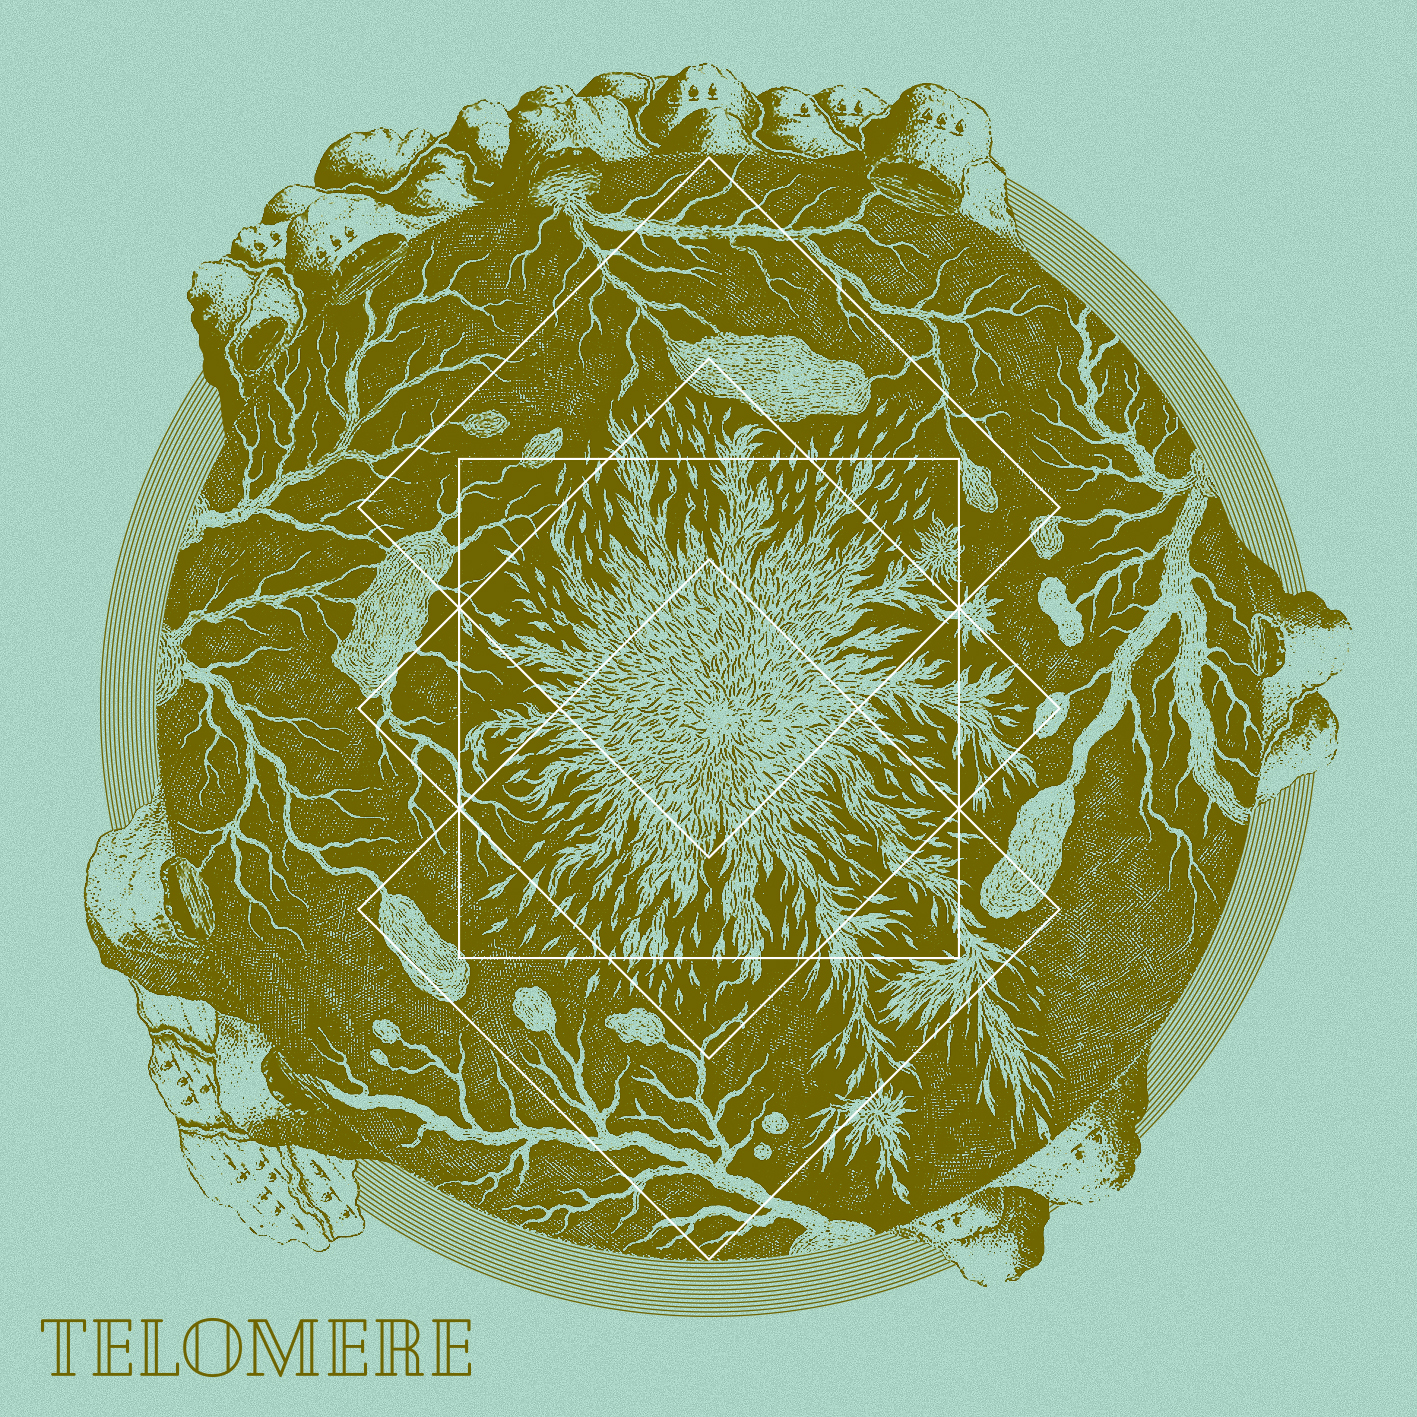 VARIOUS ARTISTS – TELOMERE